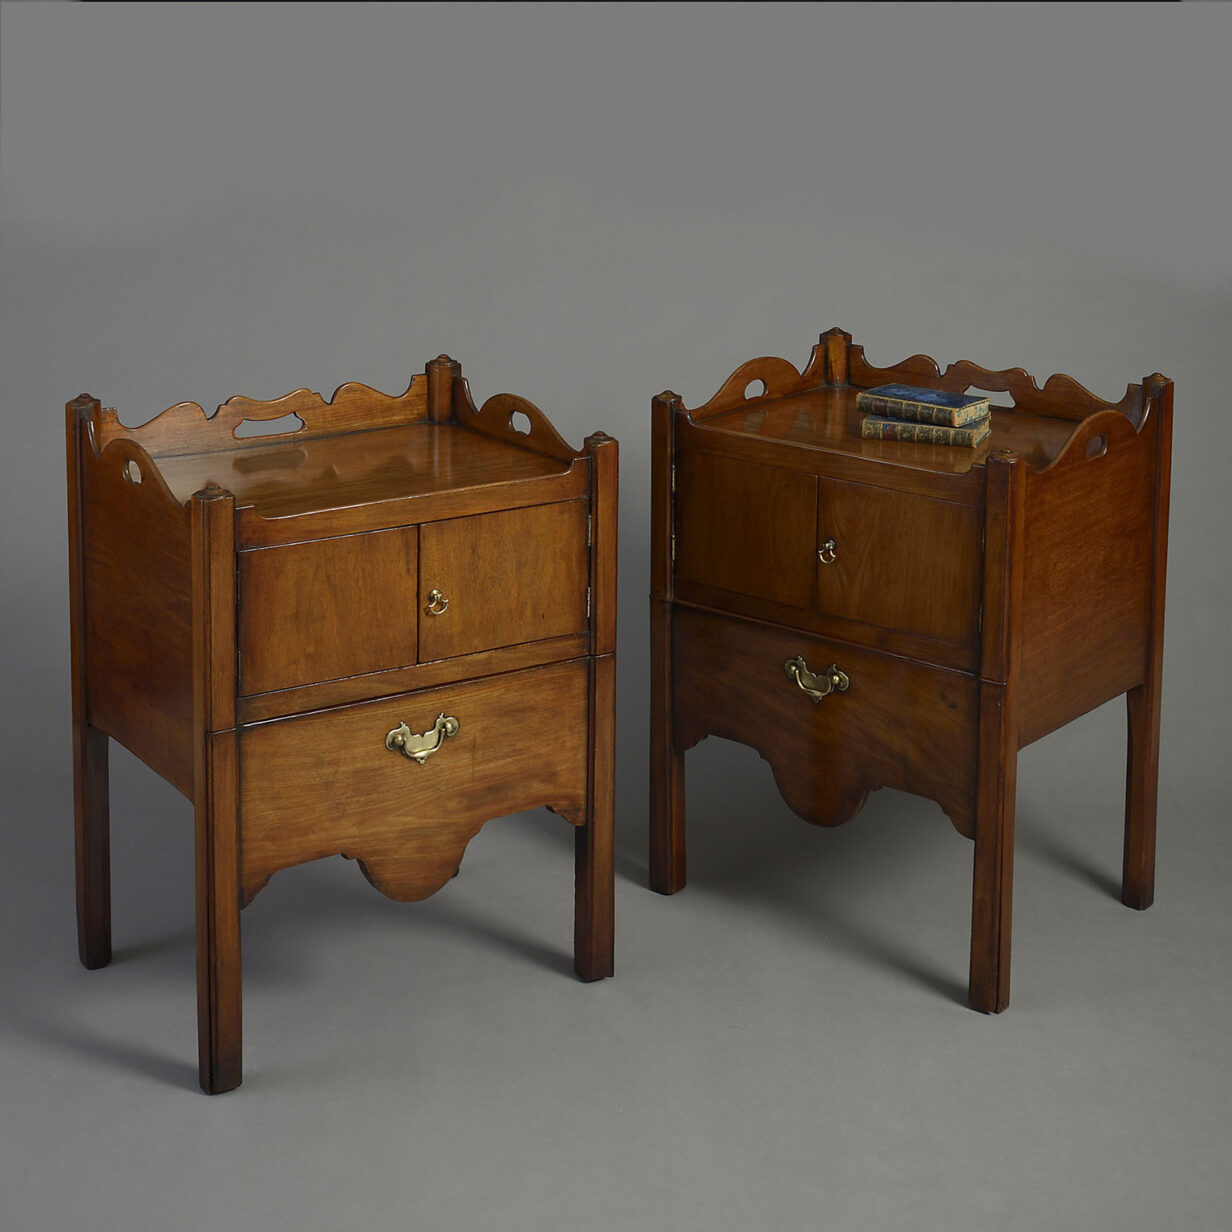 Pair of Mid-18th Century George III Chippendale Period Mahogany Bedside Commodes or Night Stands